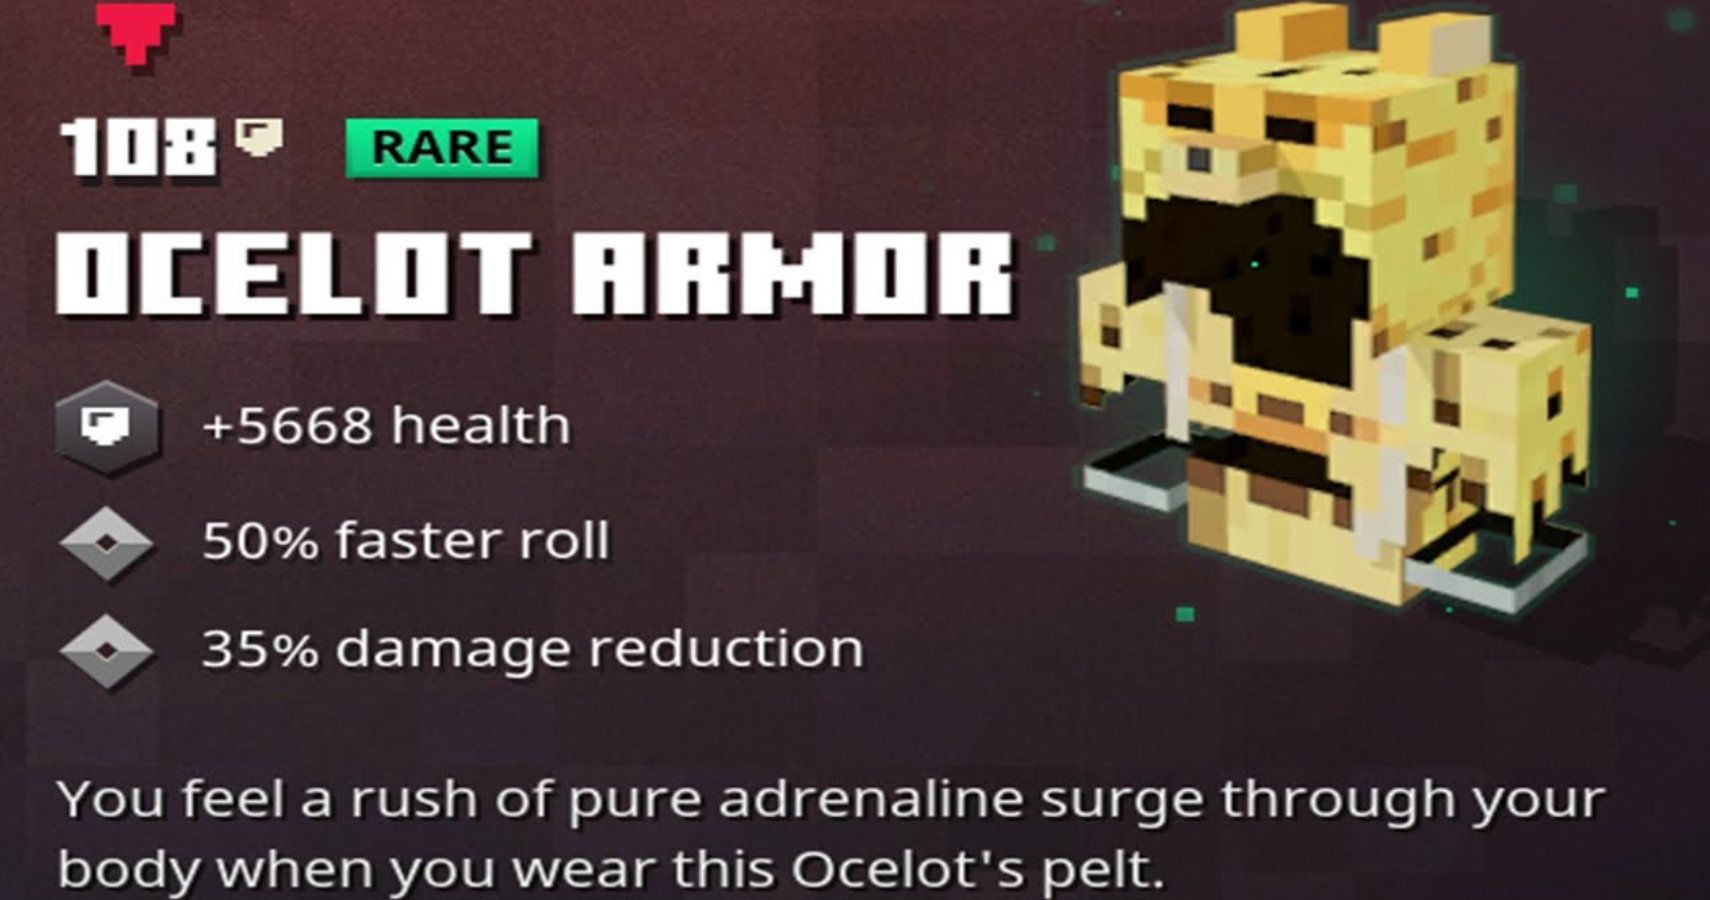 Minecraft Guide - All the Best Armor Enchantments - GameSpot